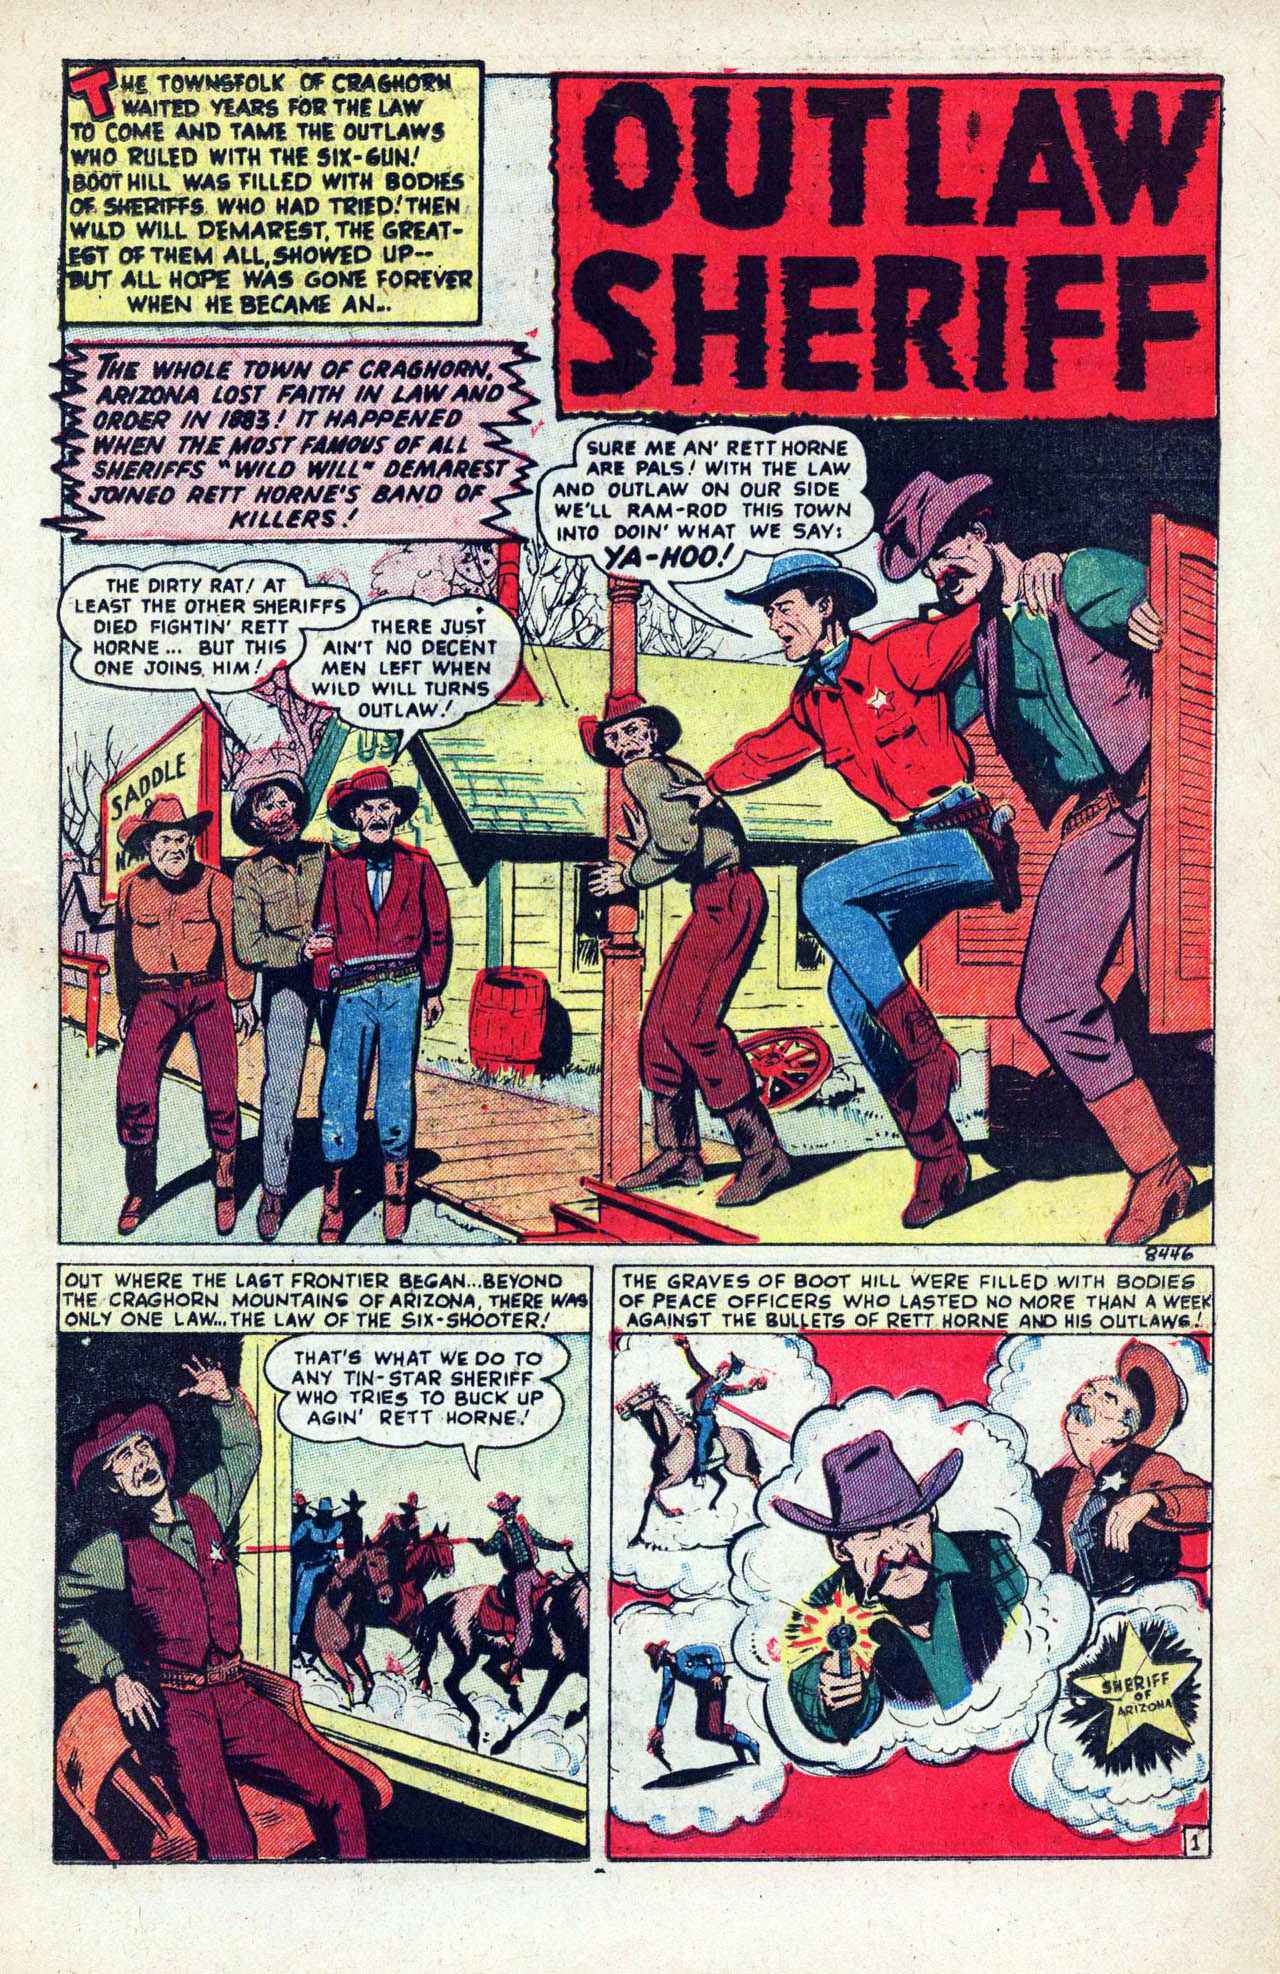 Read online Western Outlaws and Sheriffs comic -  Issue #68 - 21